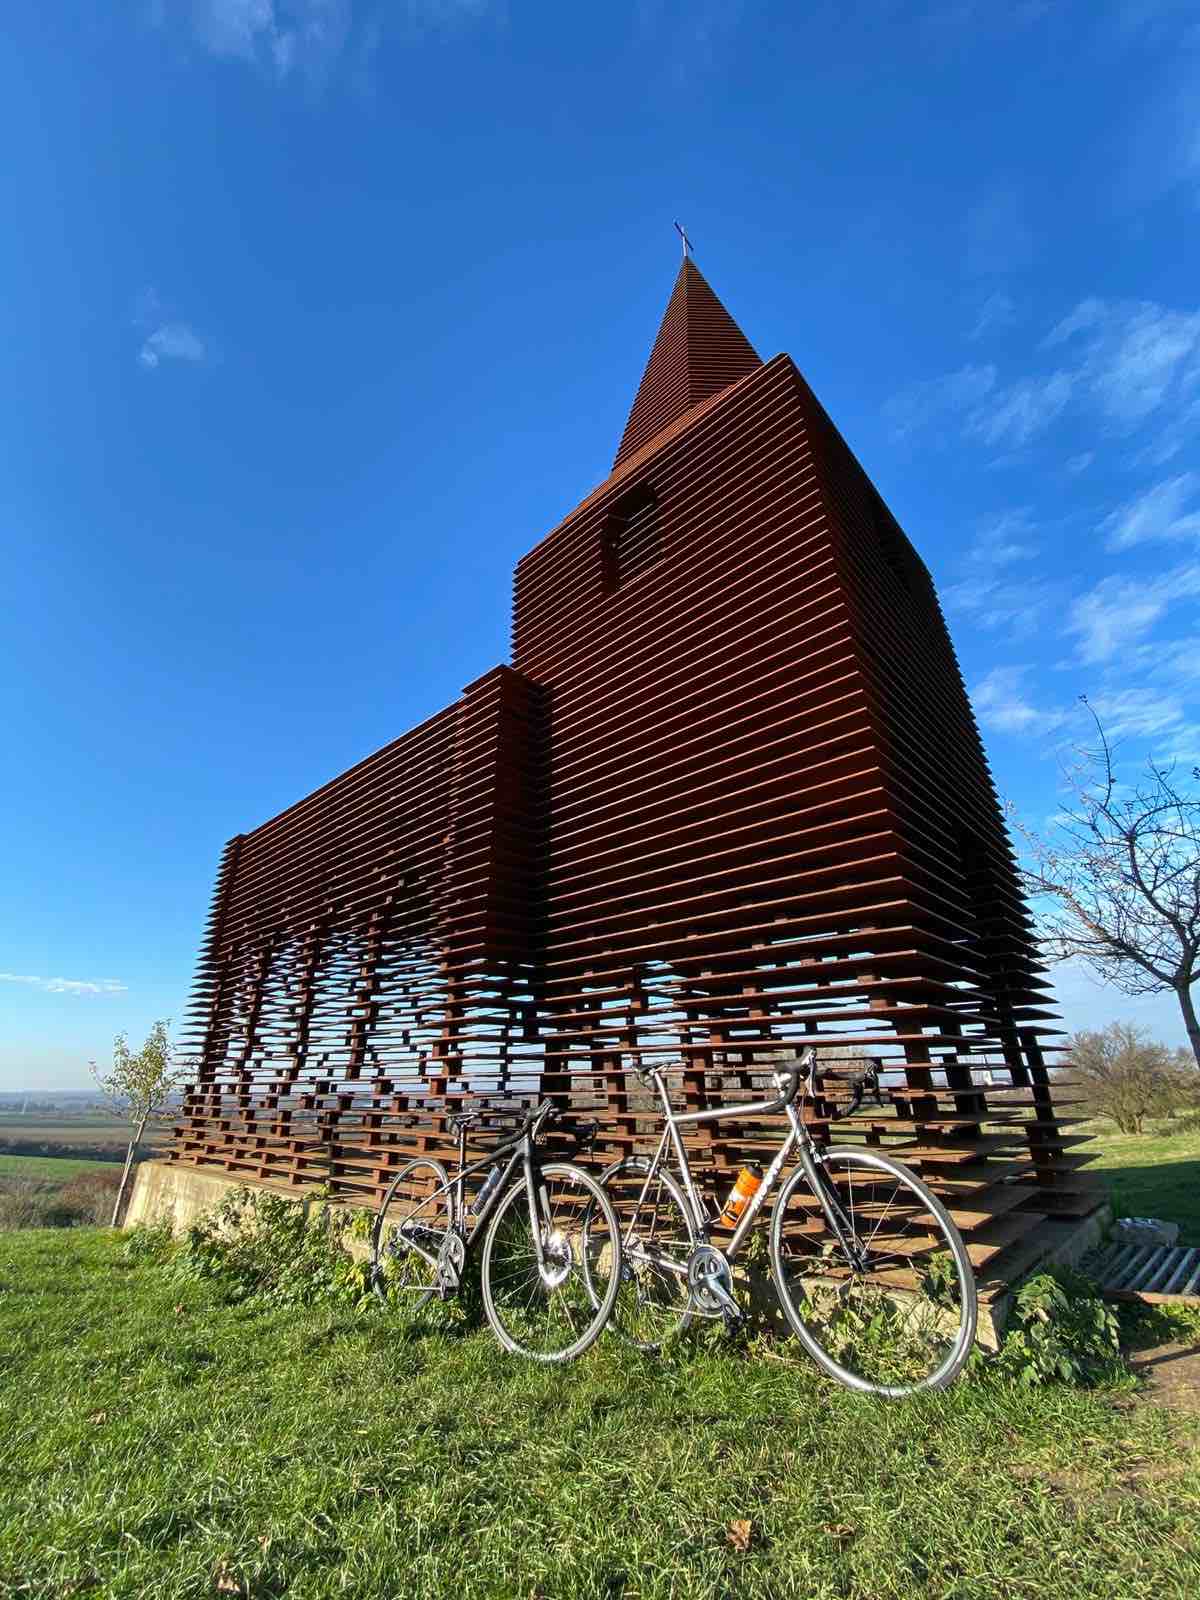 bikerumor pic of the day two bicycles leaning against a metal church sculpture in borgloon belgium by the artists GIJS VAN VAERENBERGH